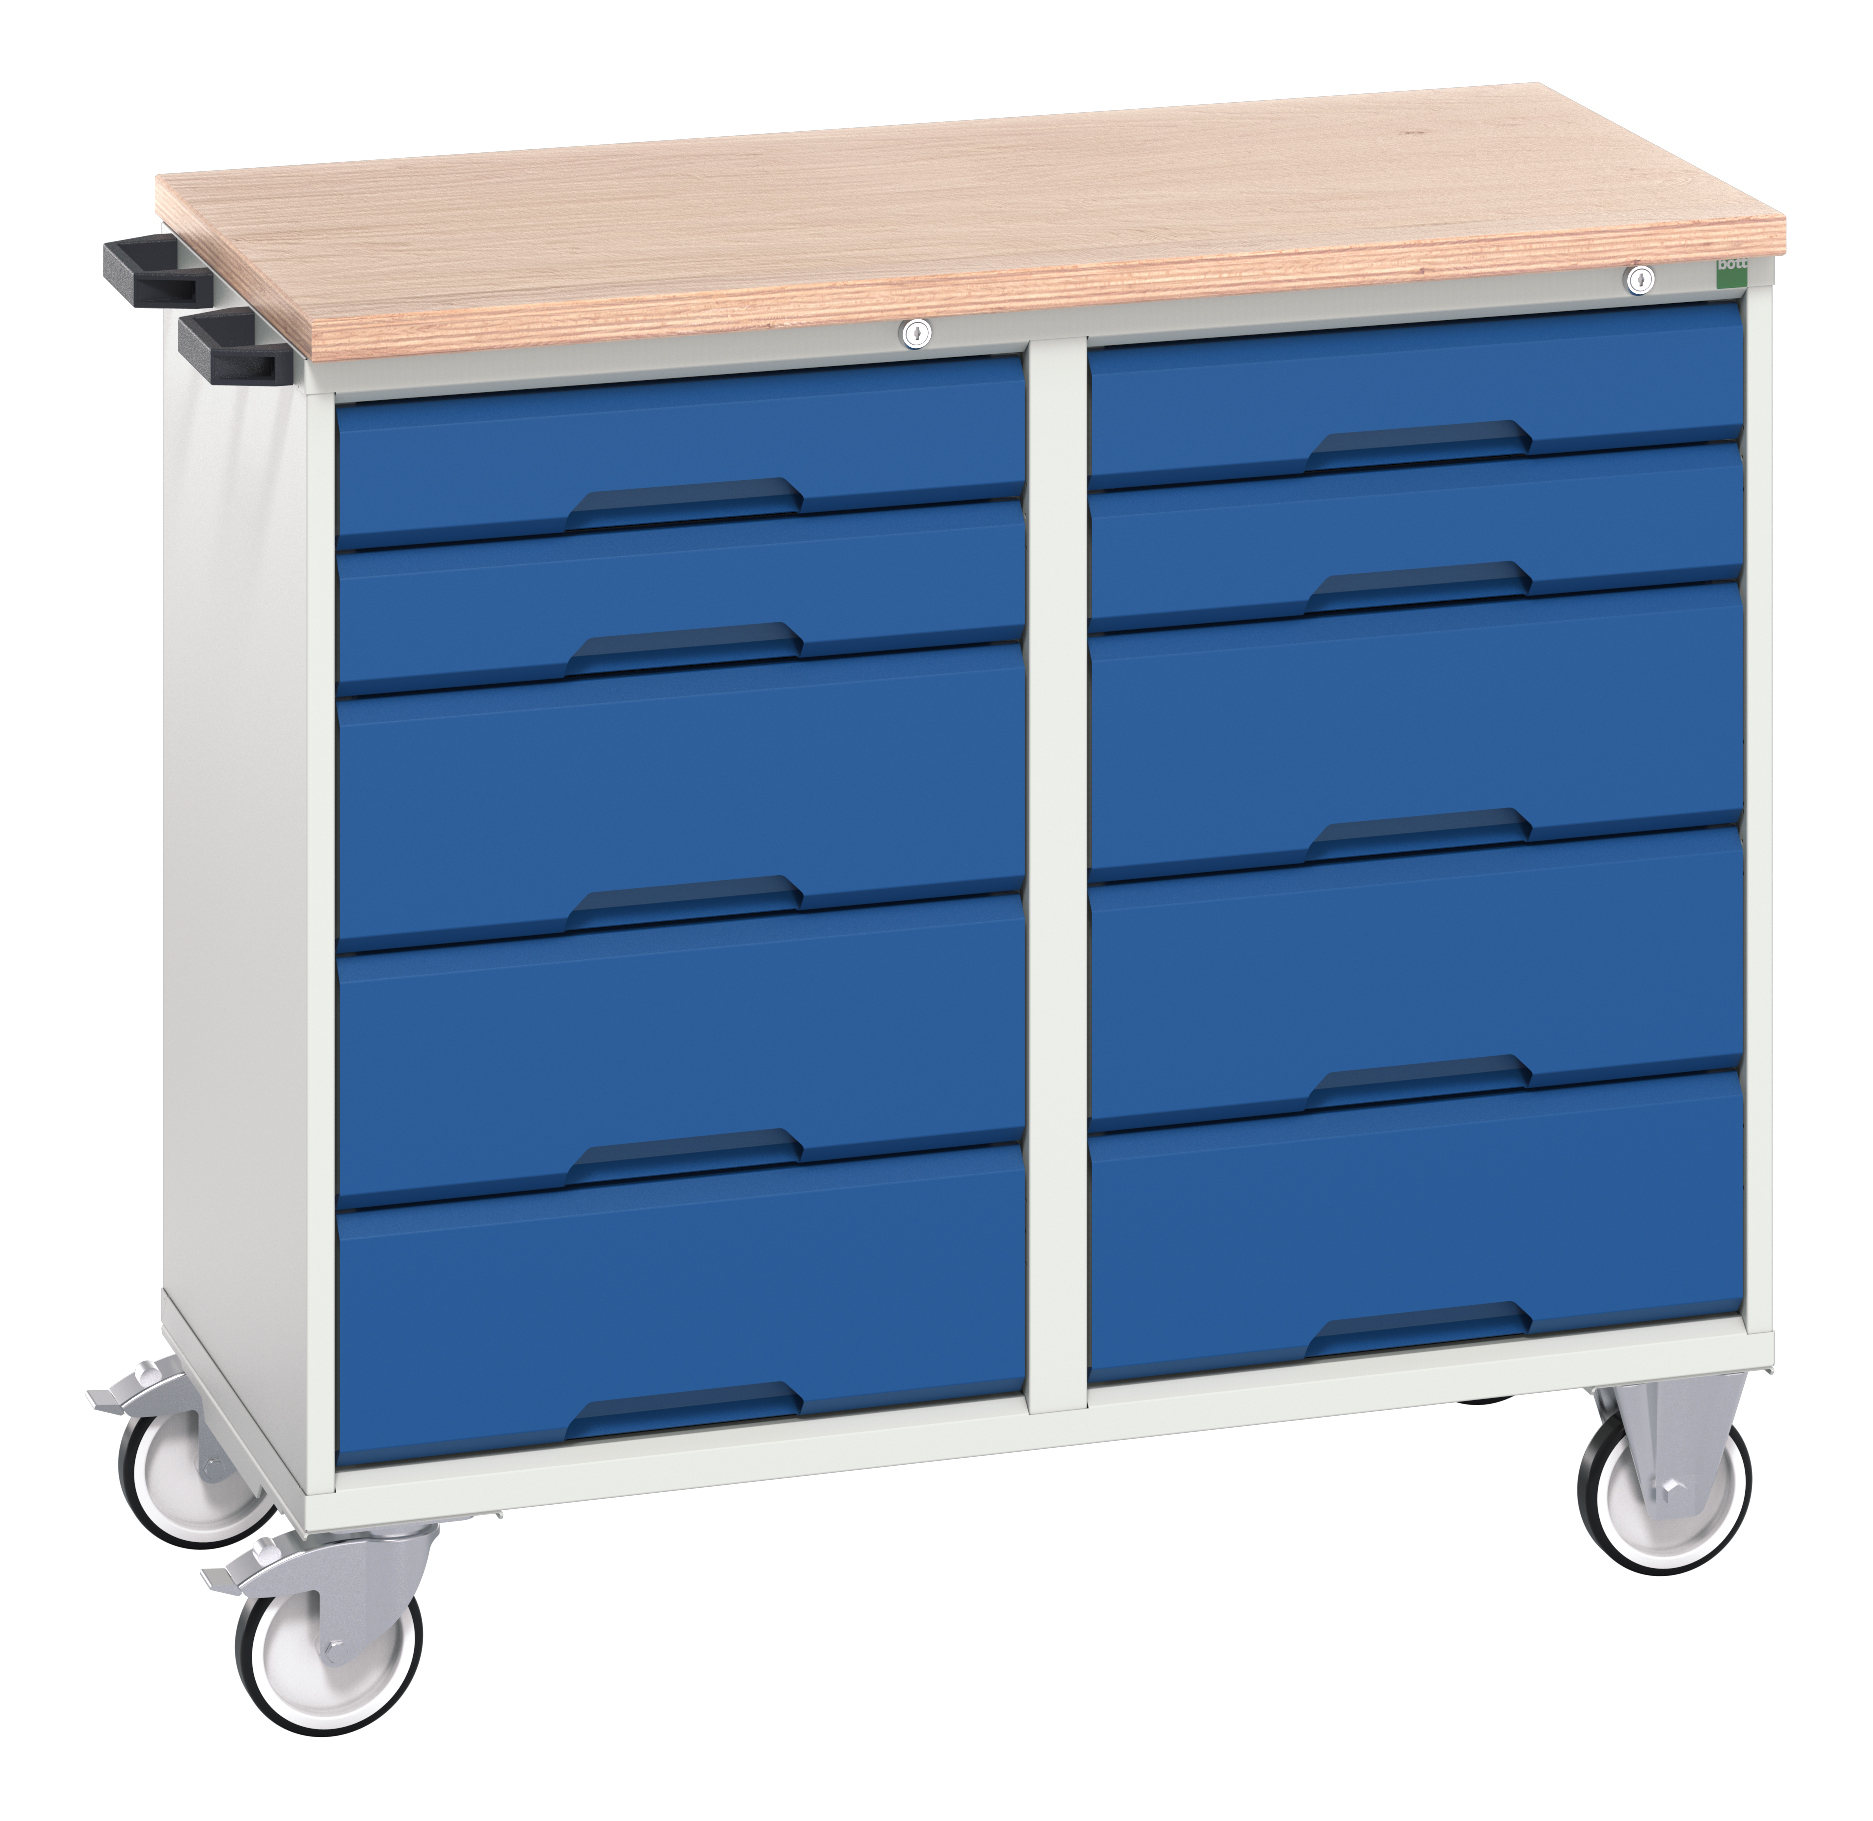 Bott Verso Maintenance Trolley With 10 Drawers & Multiplex Top - 16927101.11